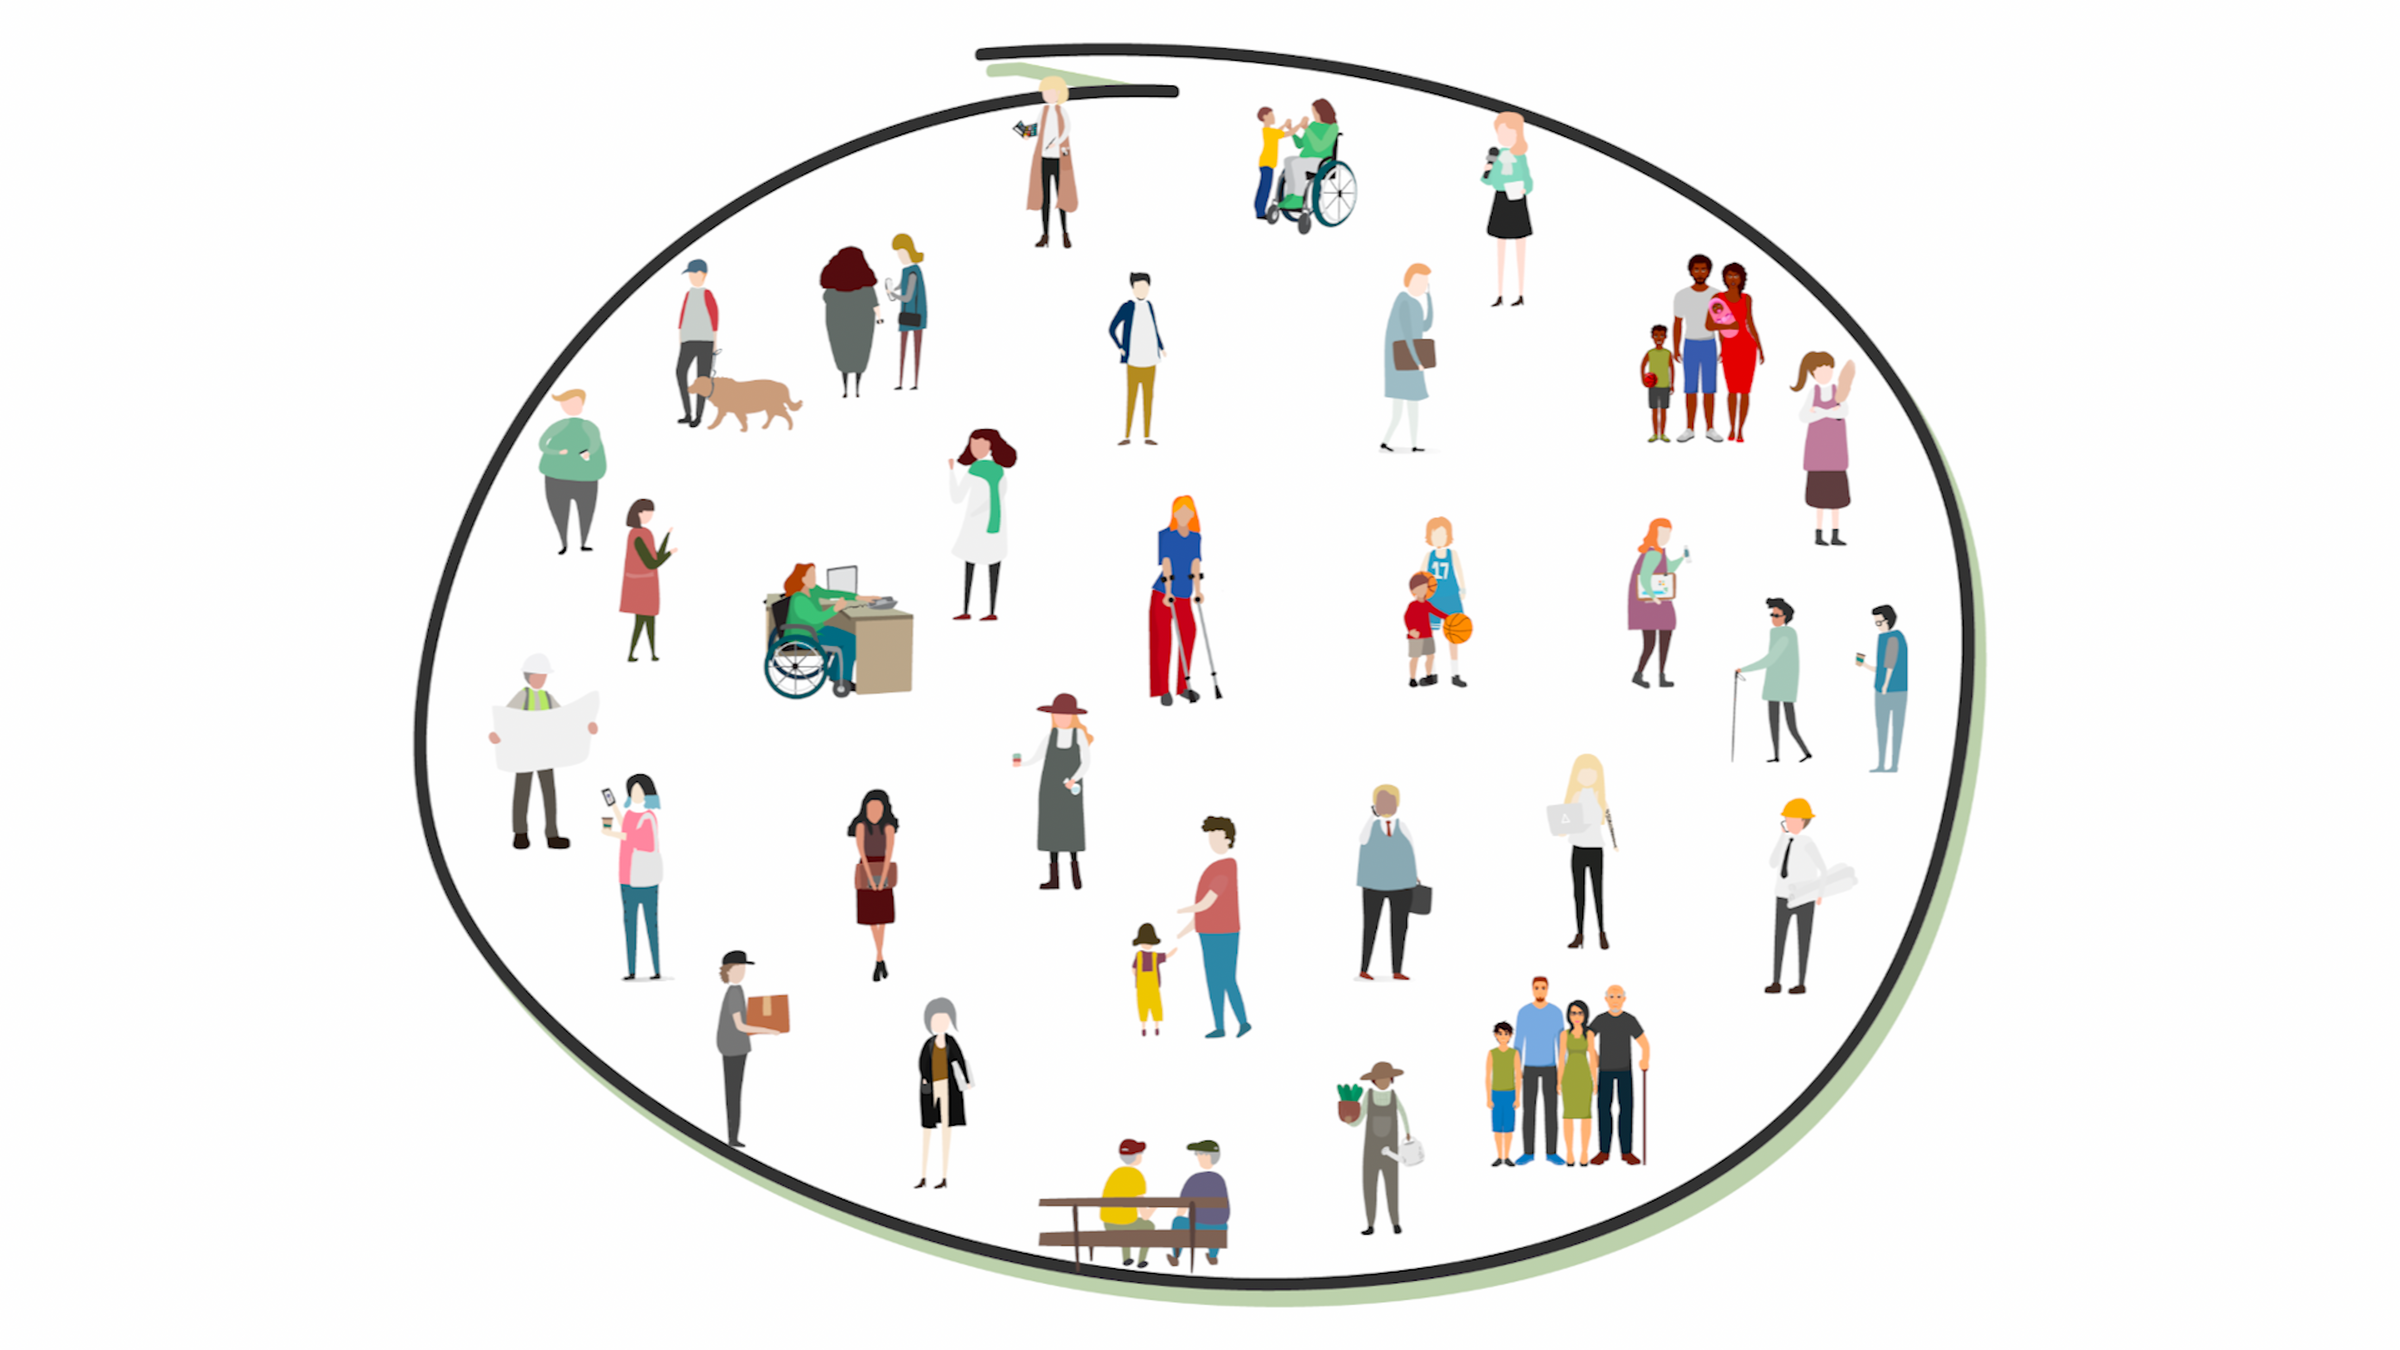 An illustration of all differently abled and different aged people in a circle.